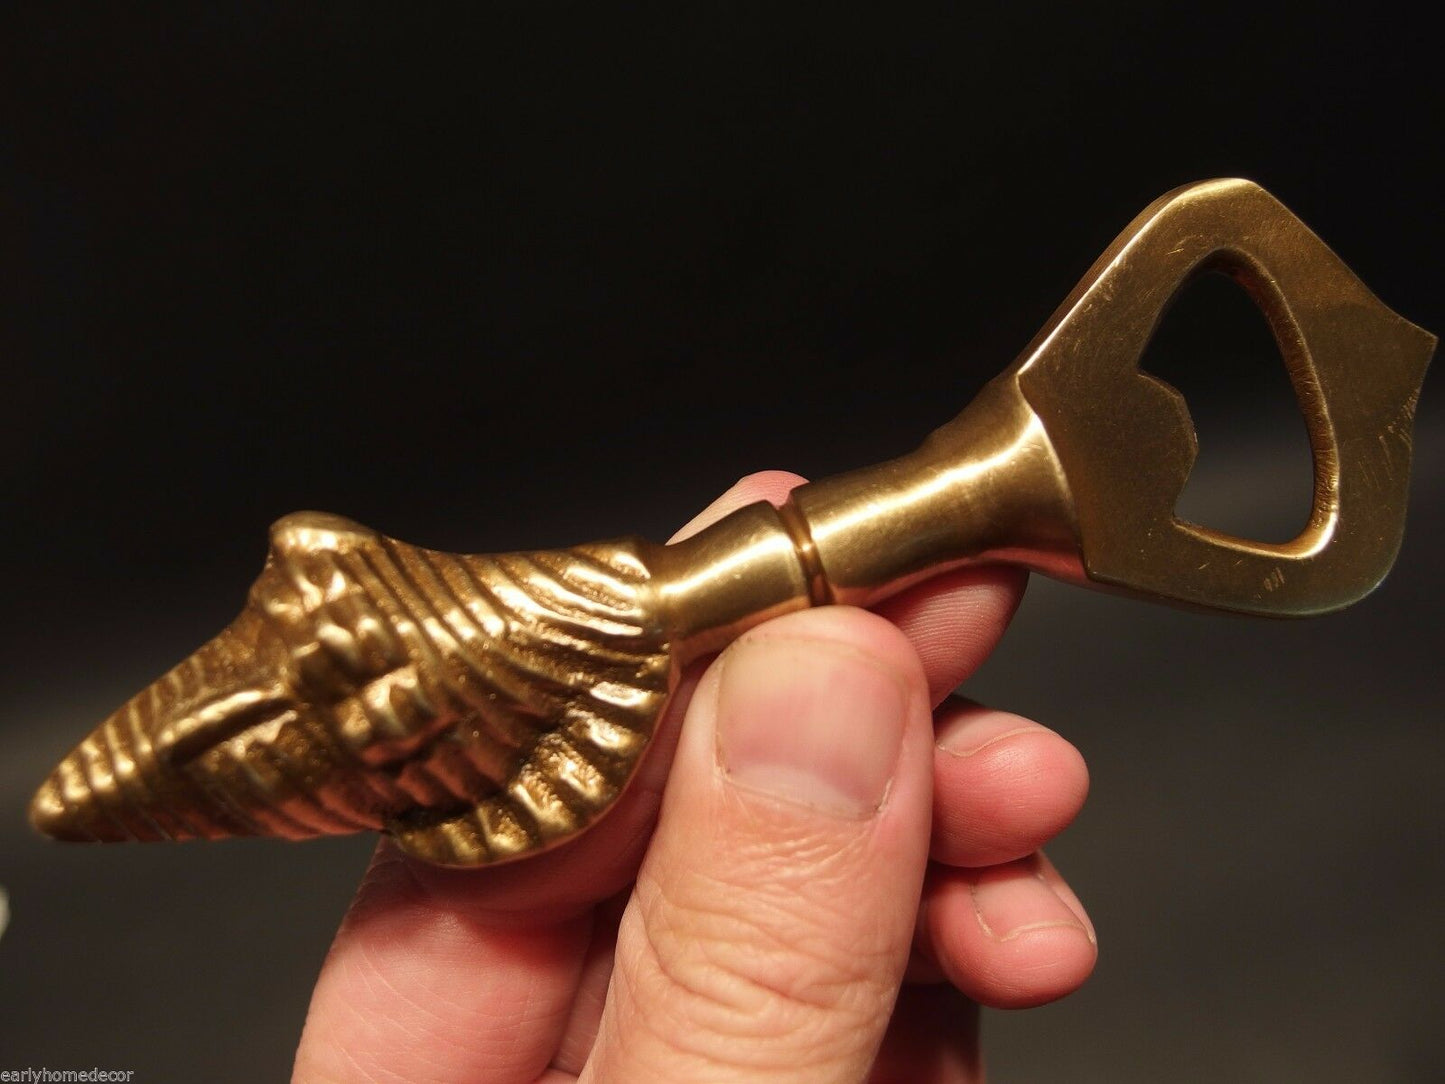 Vintage Antique Style Brass Fishing Conch Shell Beer Soda Bottle Cap Opener - Early Home Decor